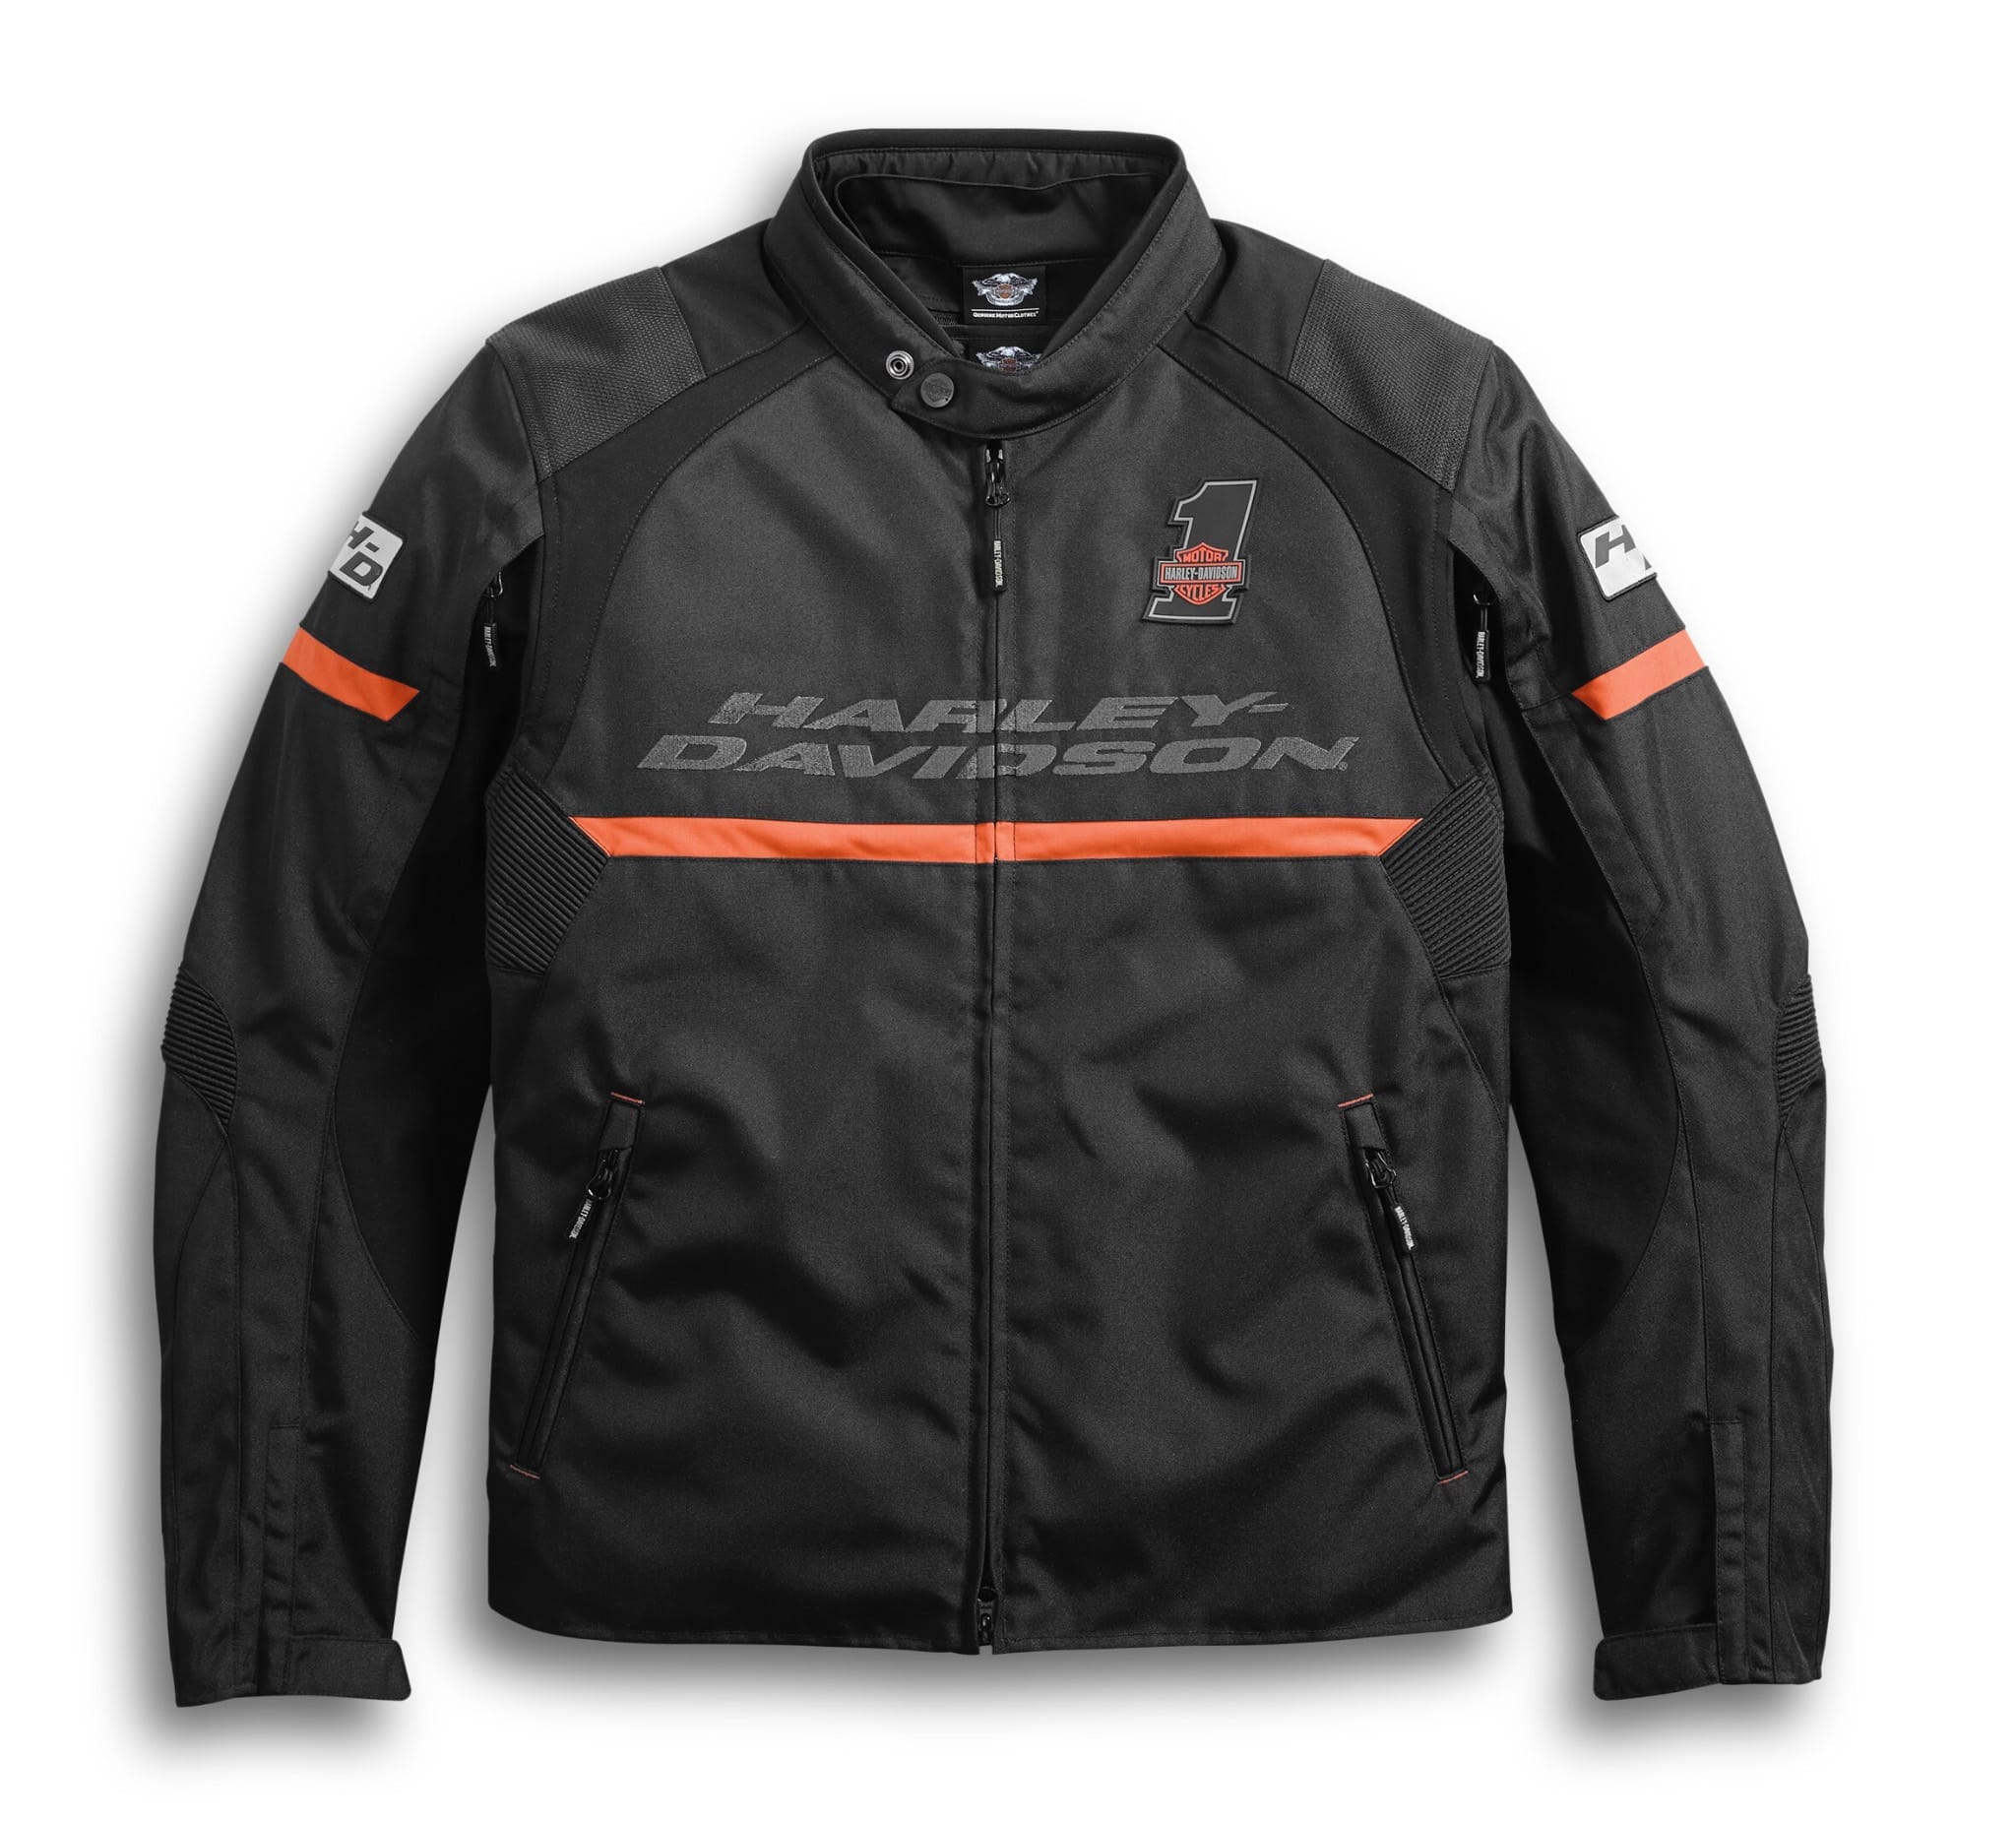 Riding Jacket - What riding gears should be brought along before traveling to Vietnam?